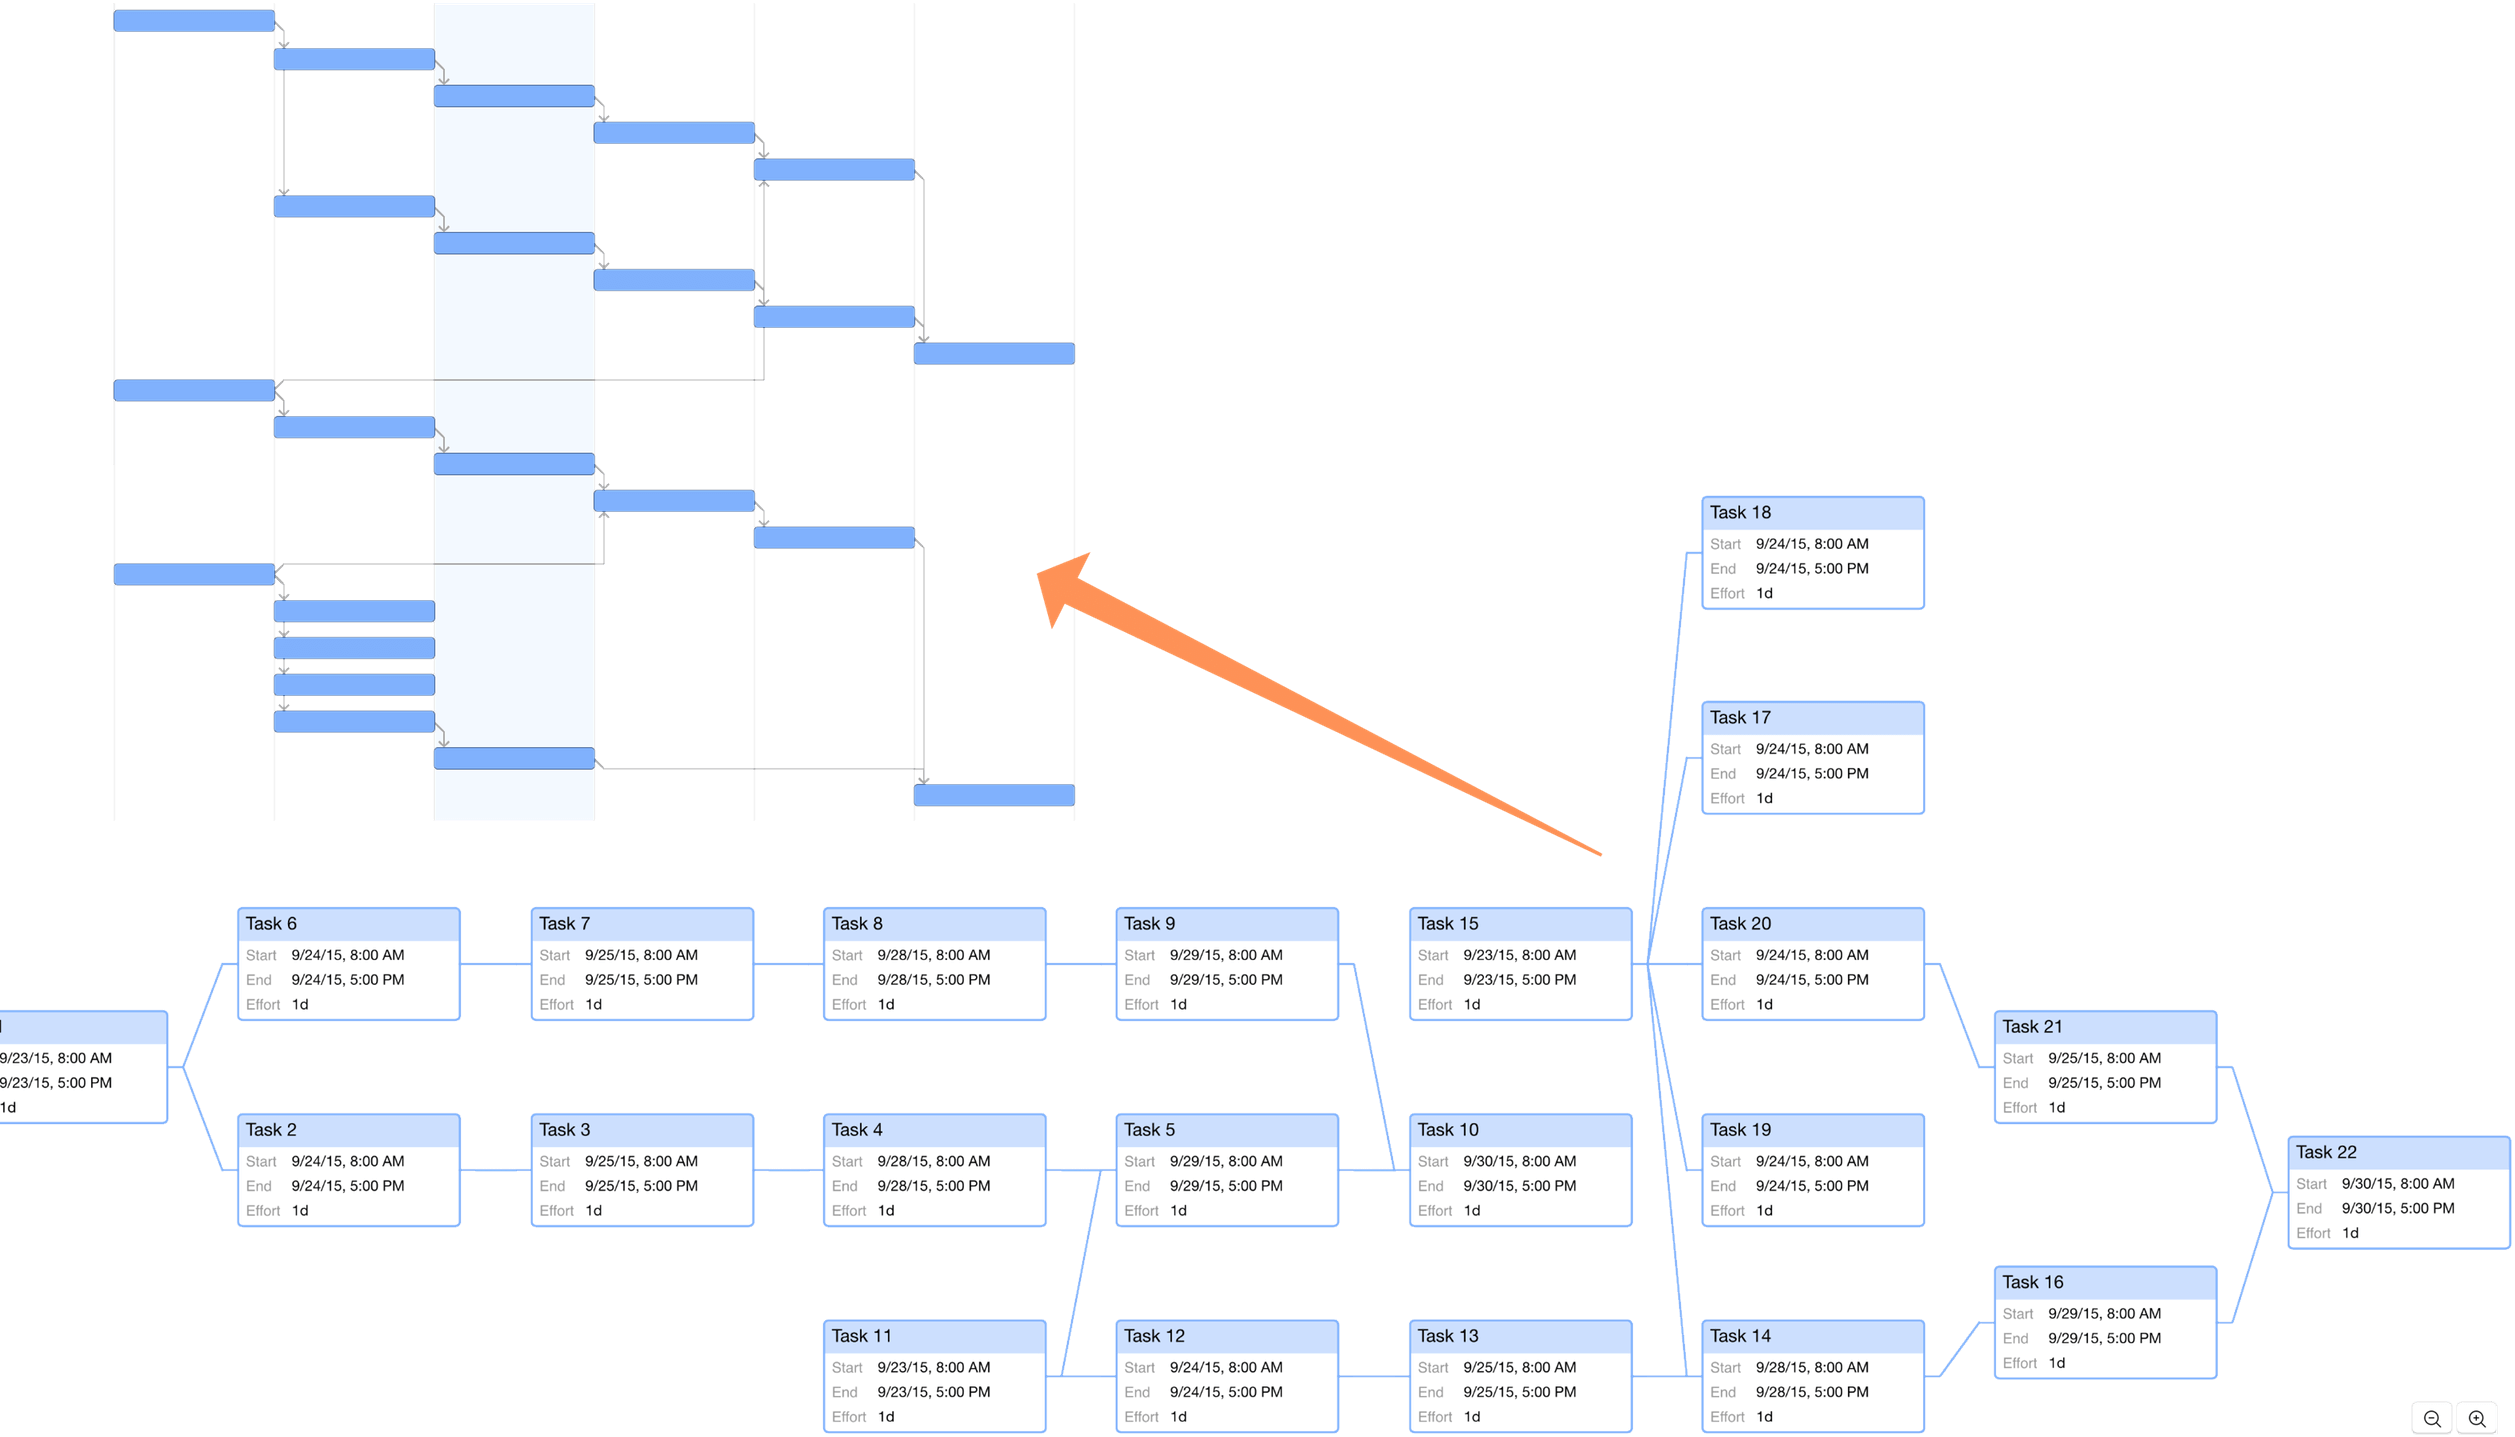 A more complex project diagrammed in Network View, compared to its appearance in the Gantt chart.